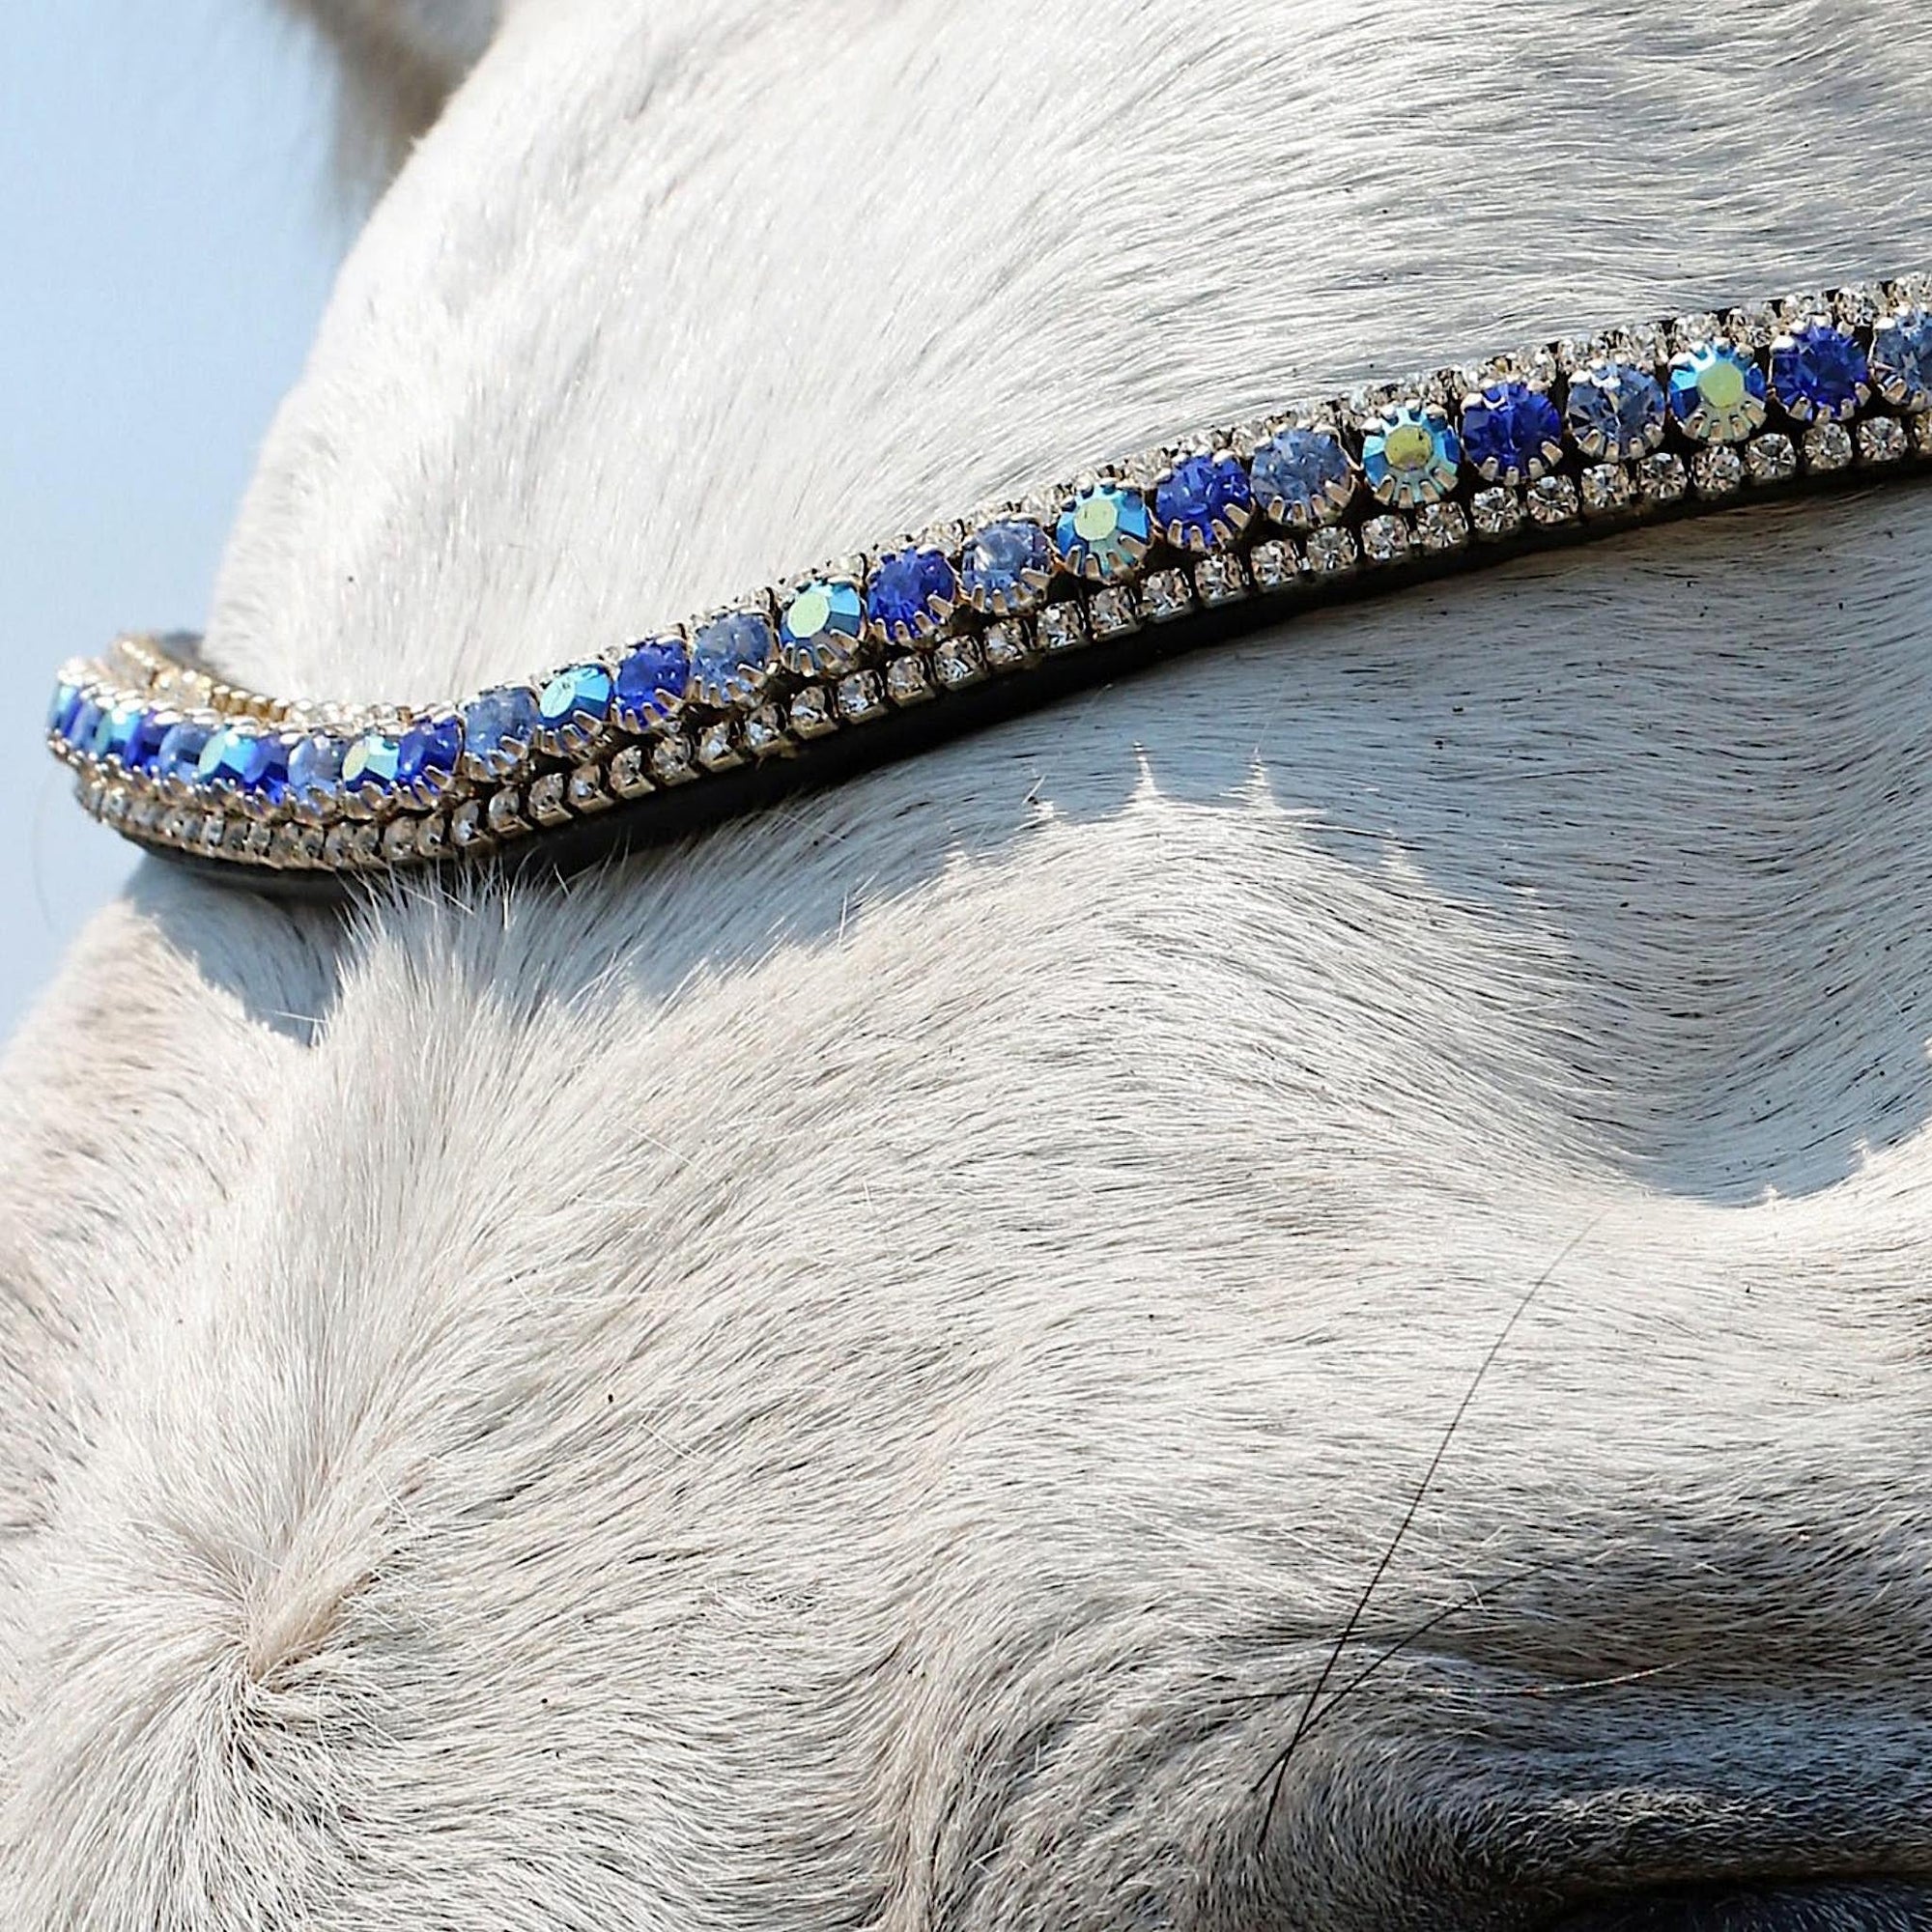 Silver and blue crystals encrusted onto a browband with black leather padding.